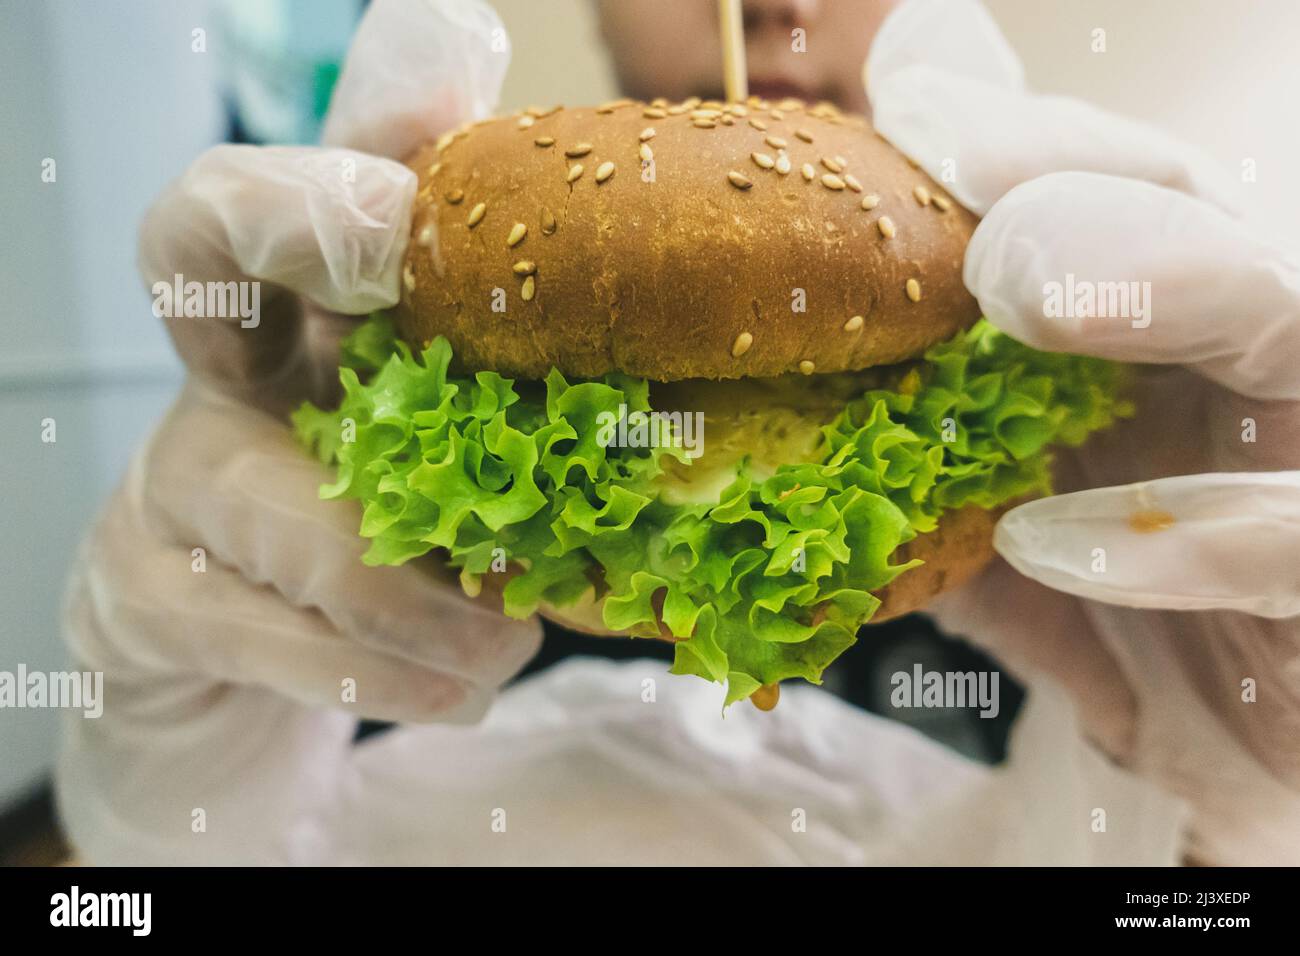 Man in rubber gloves holding a burger. Stock Photo